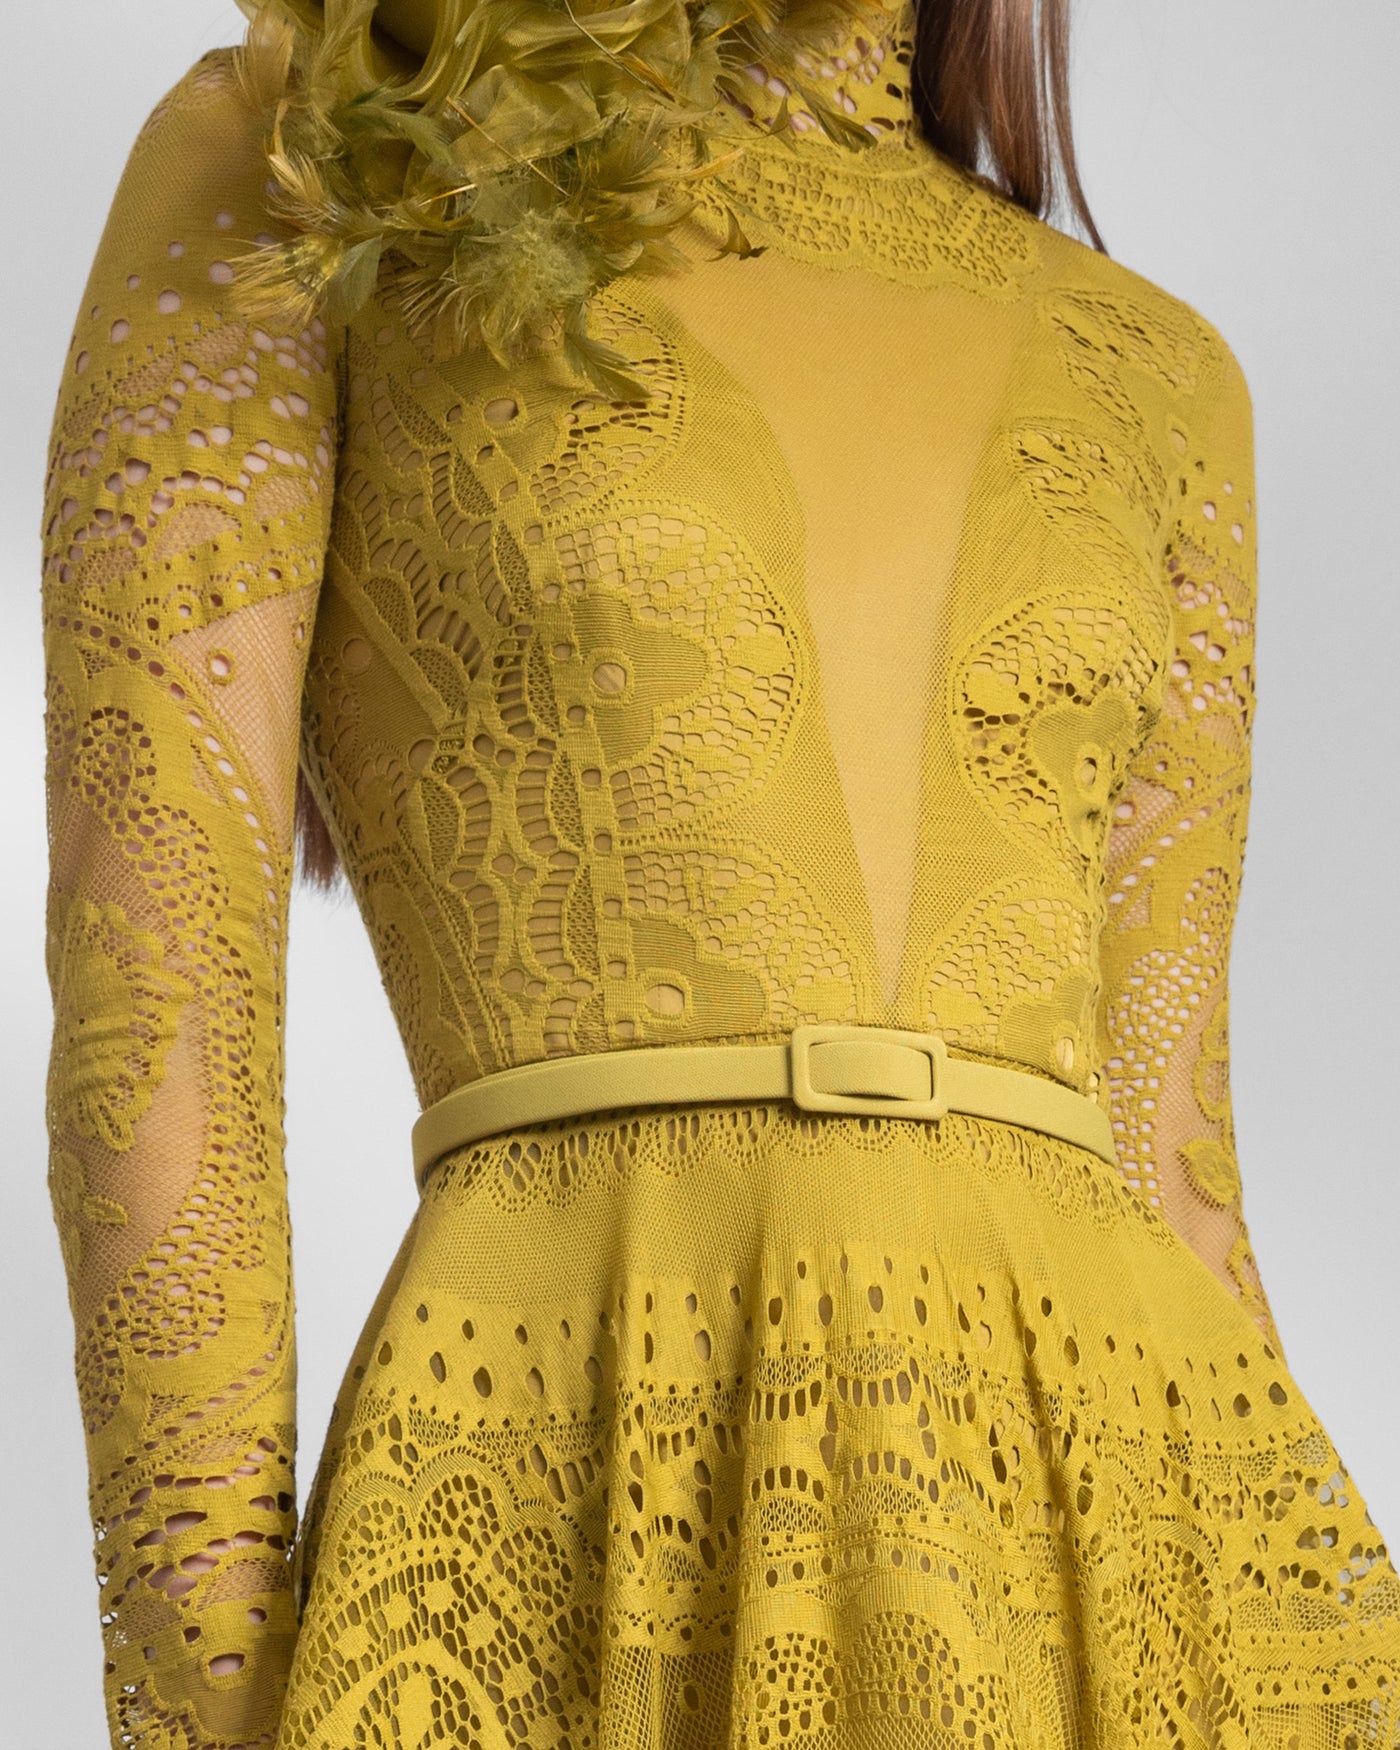 Fully Intricated Lace Dress